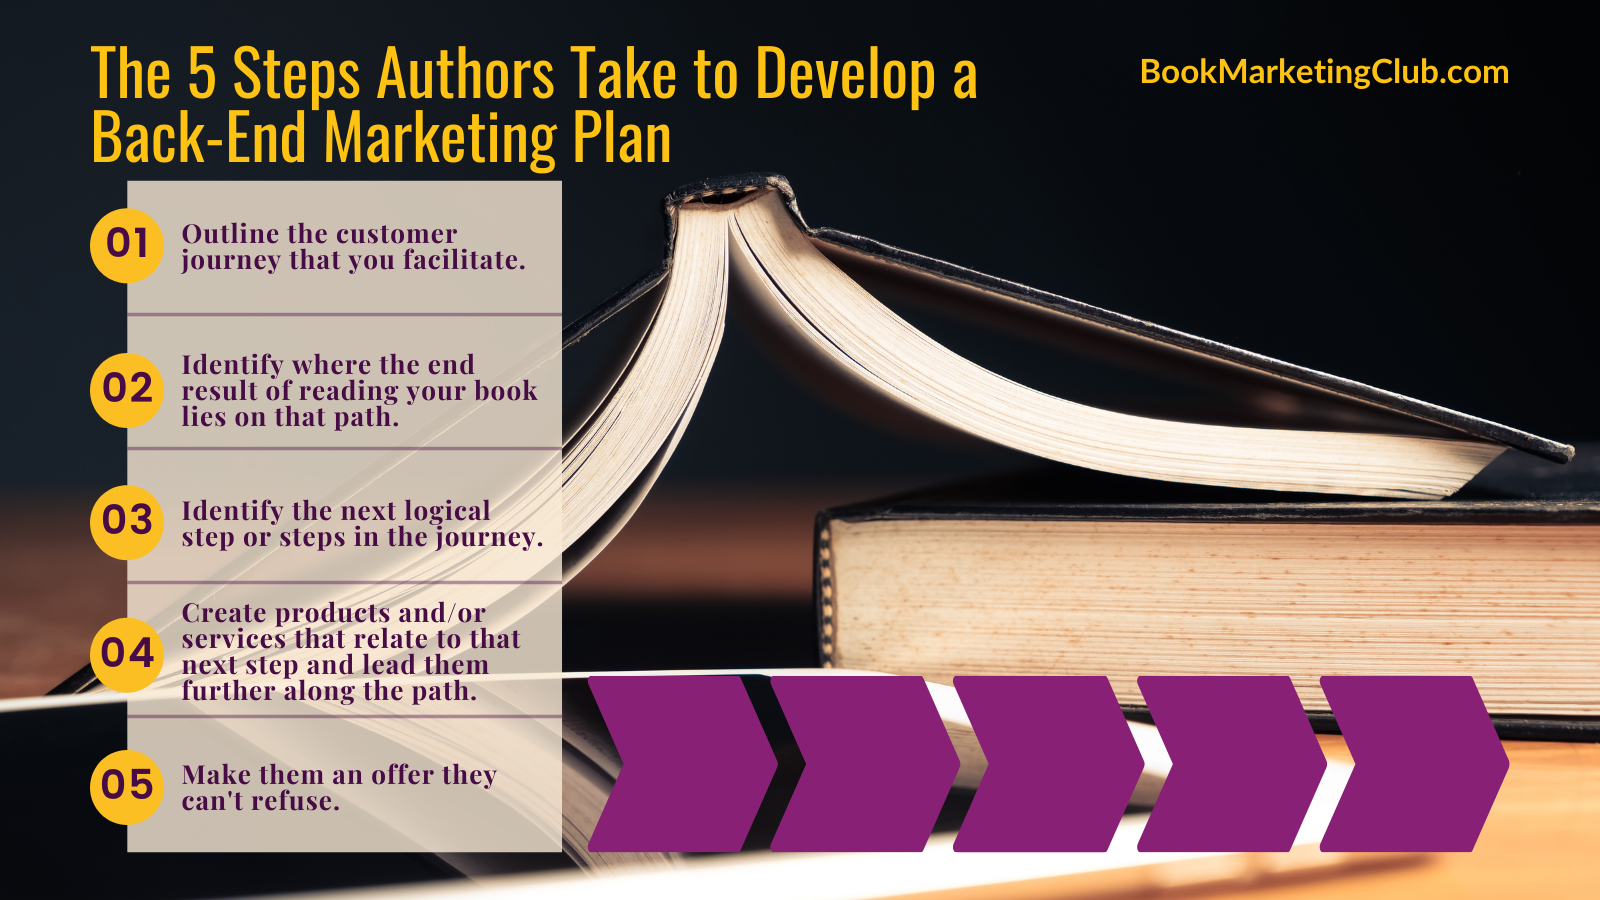 The 5 Steps Authors Take to Develop a Back-End Marketing Plan